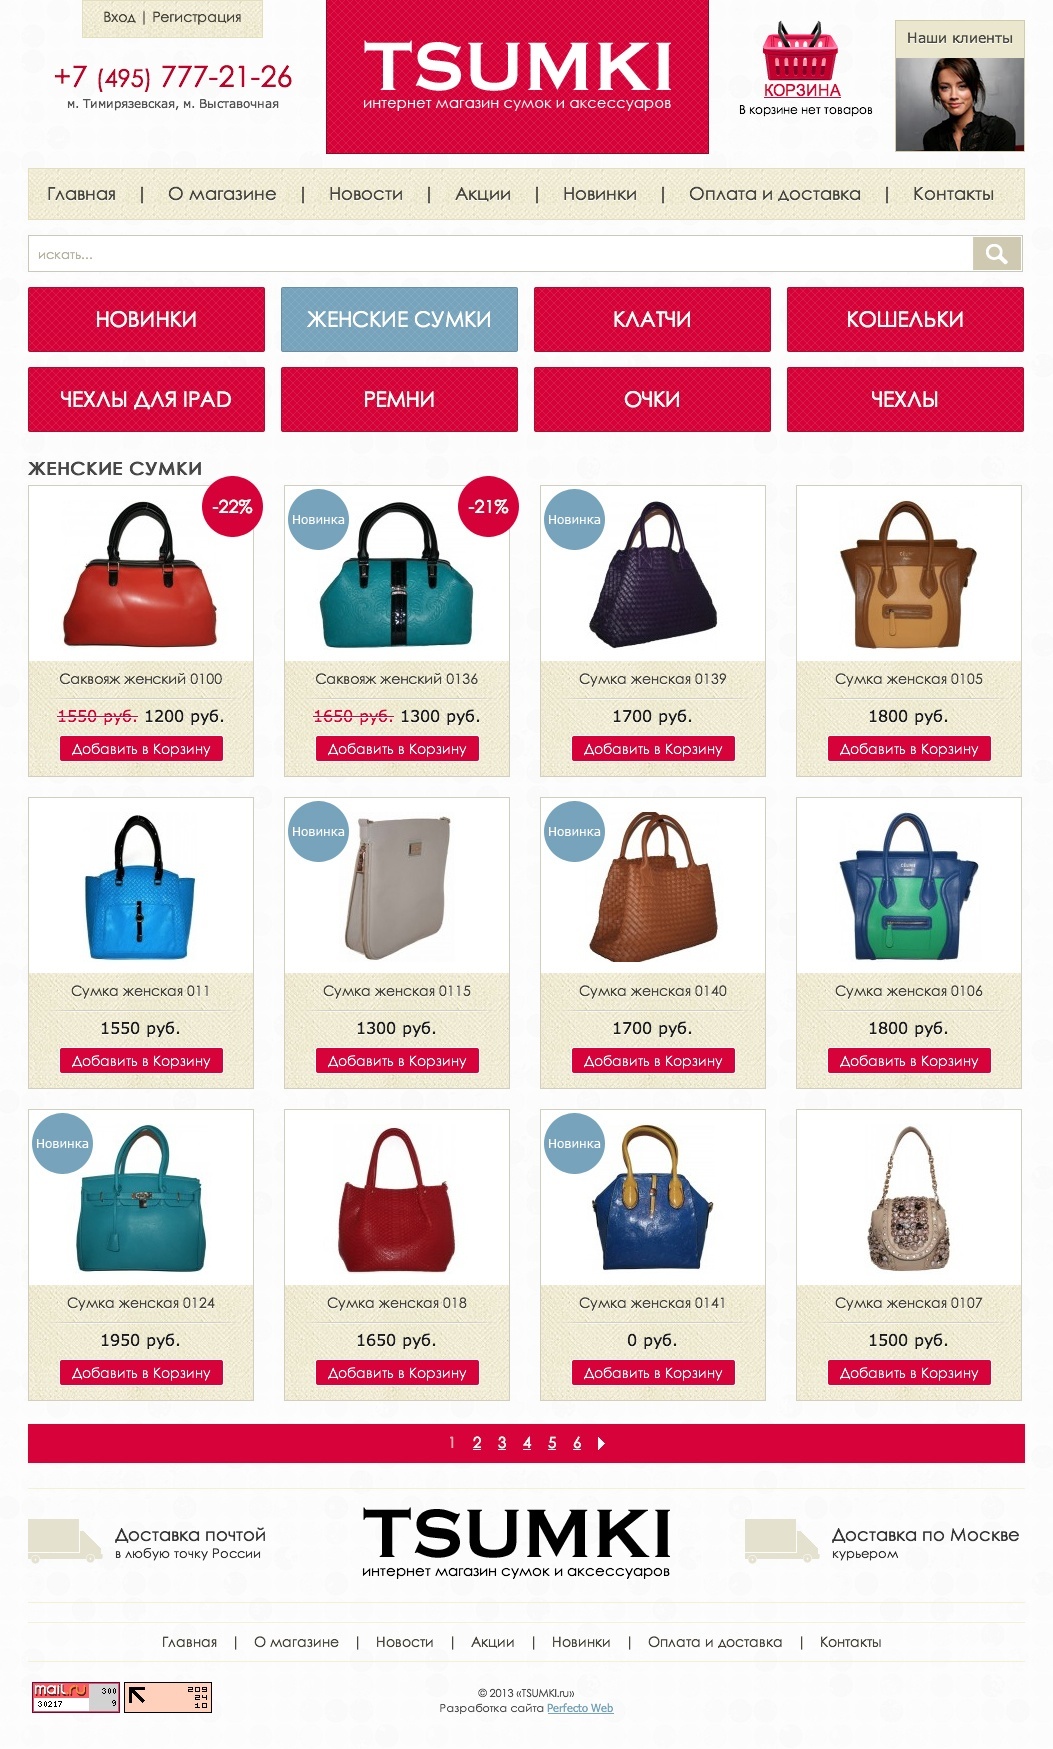 Tsumki - handbags and accessories online shop №2- Store catalog page